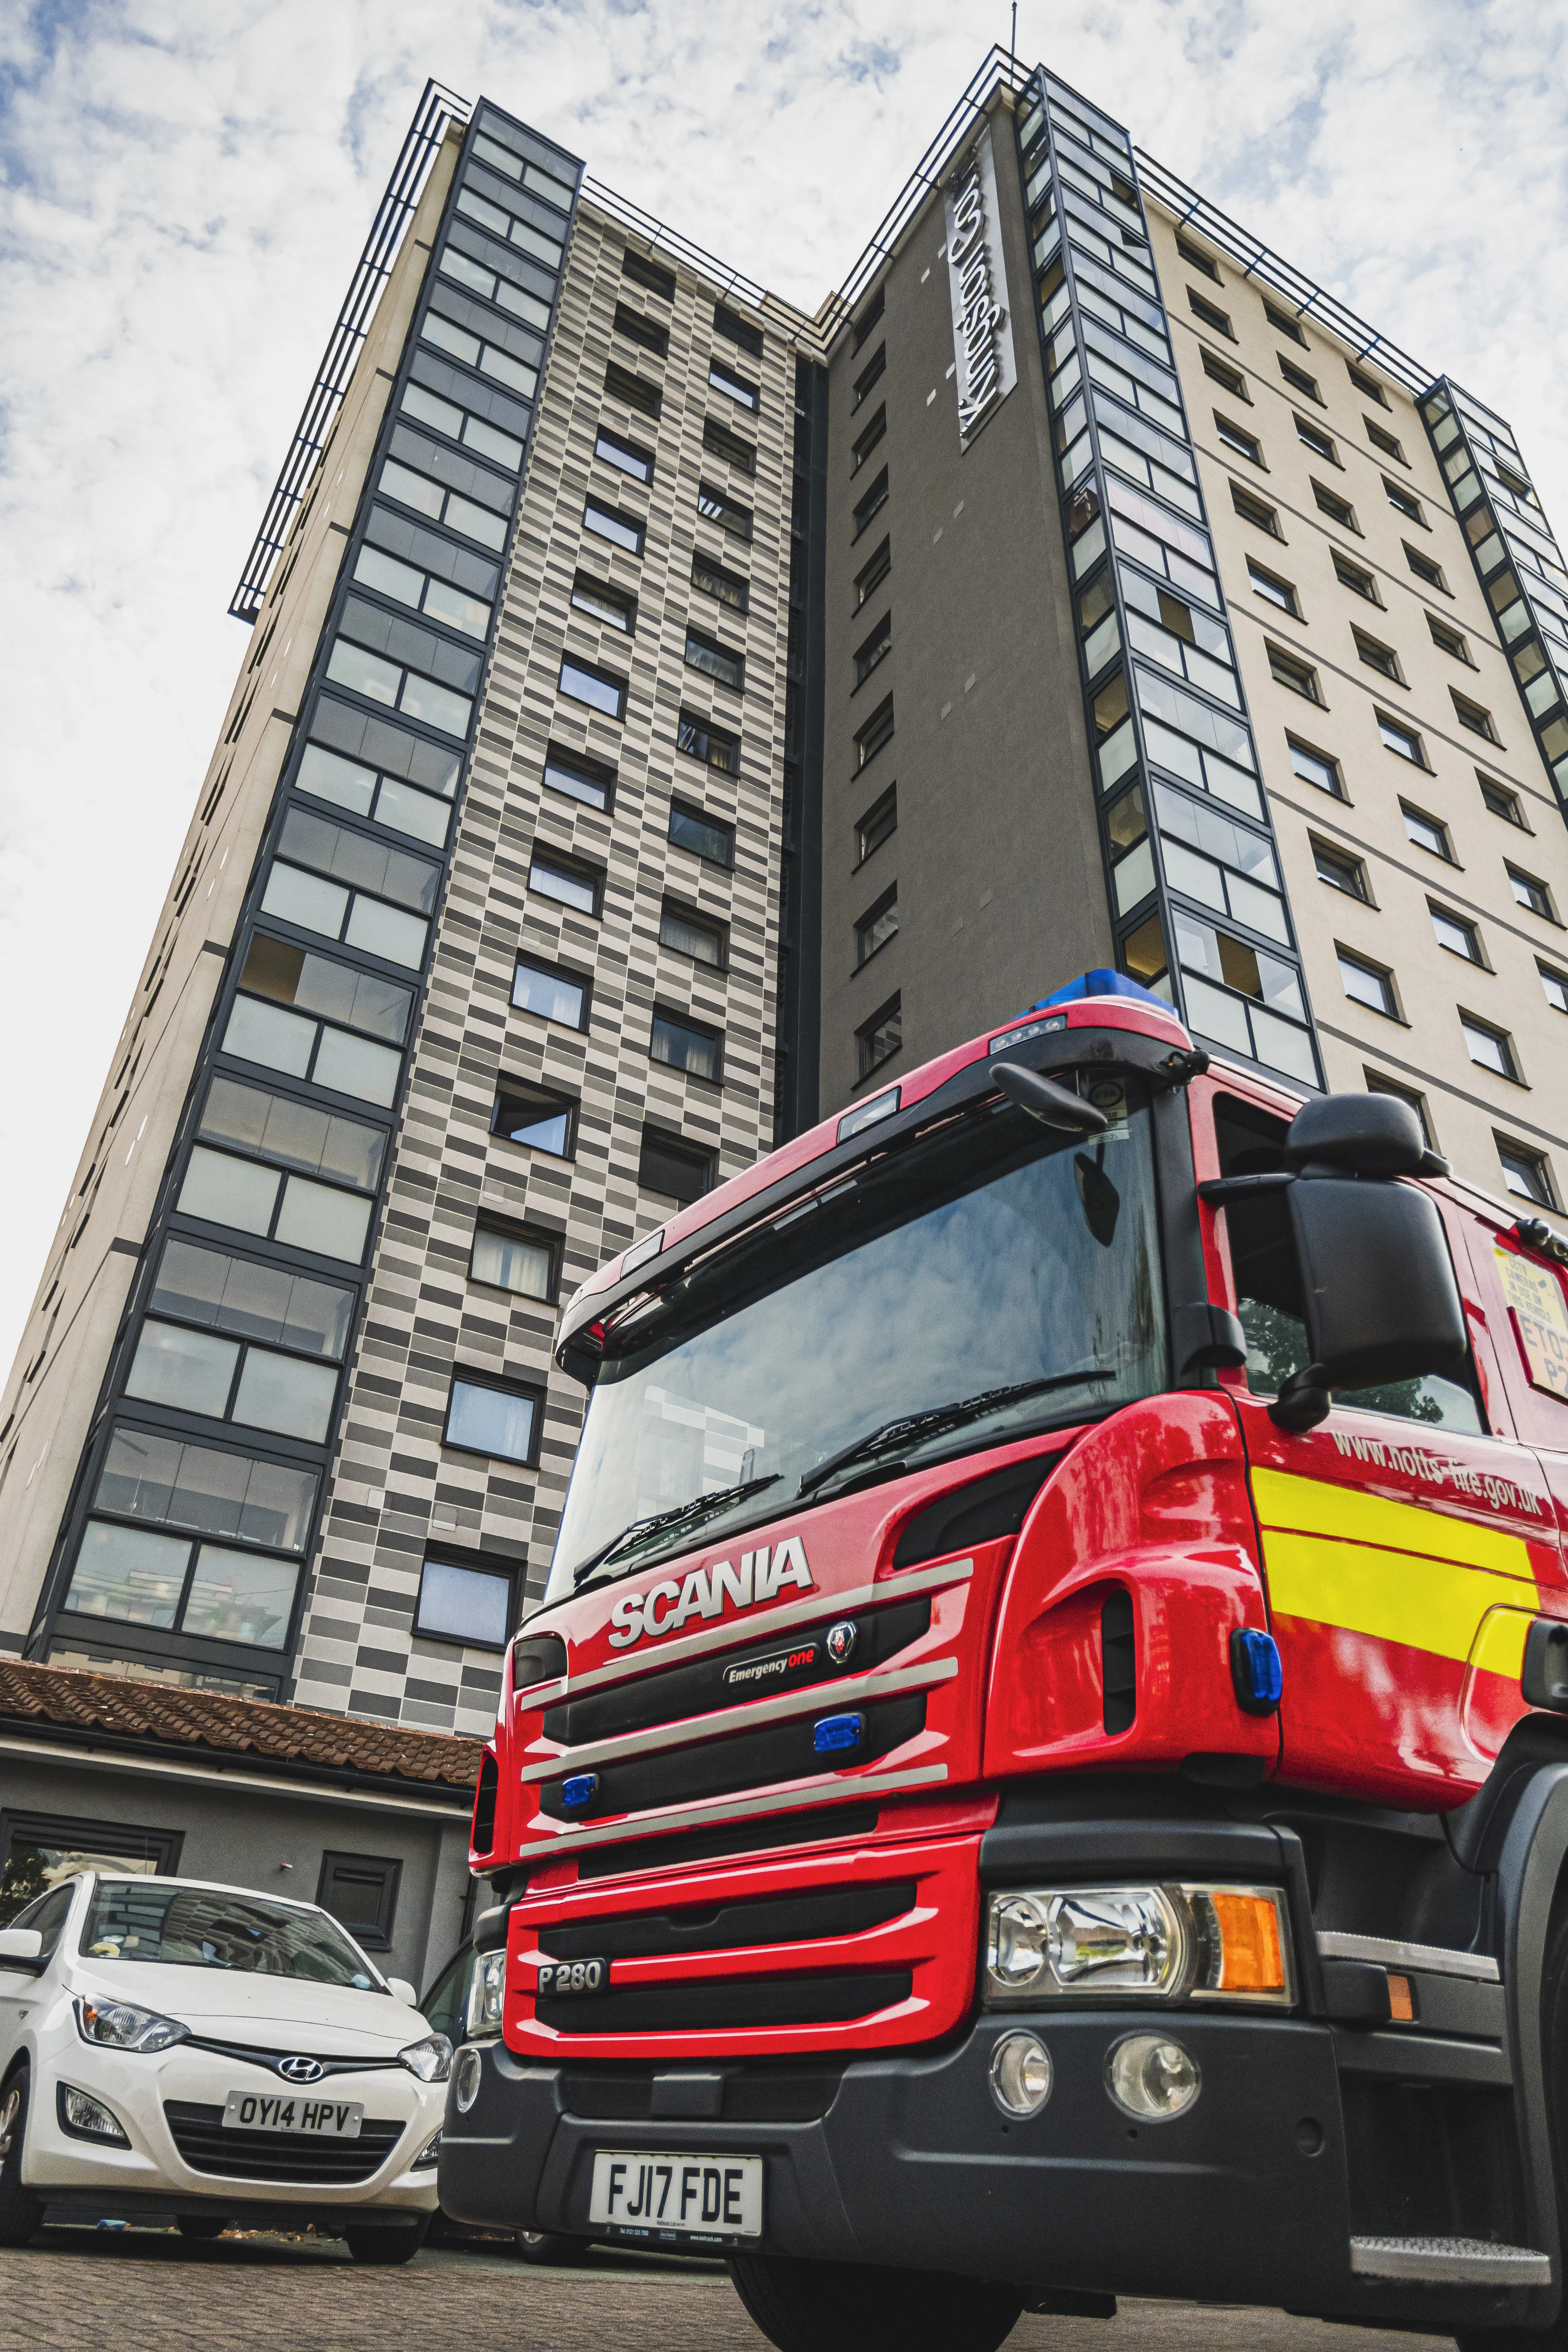 a high rise building with a fire engine in the foreground